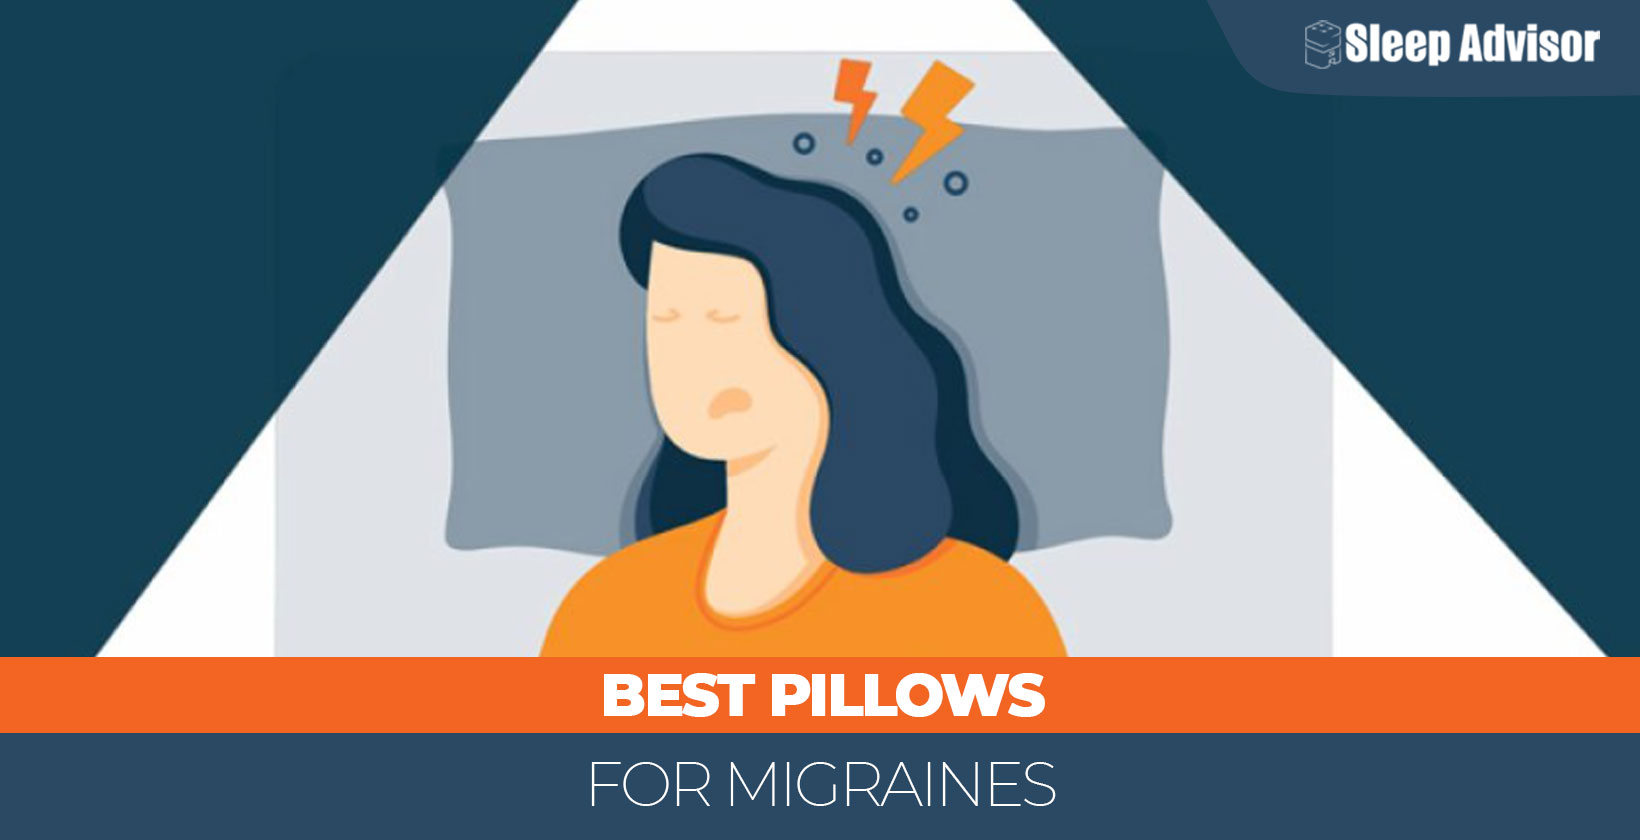 Best Pillows for Migraines 1640x840px